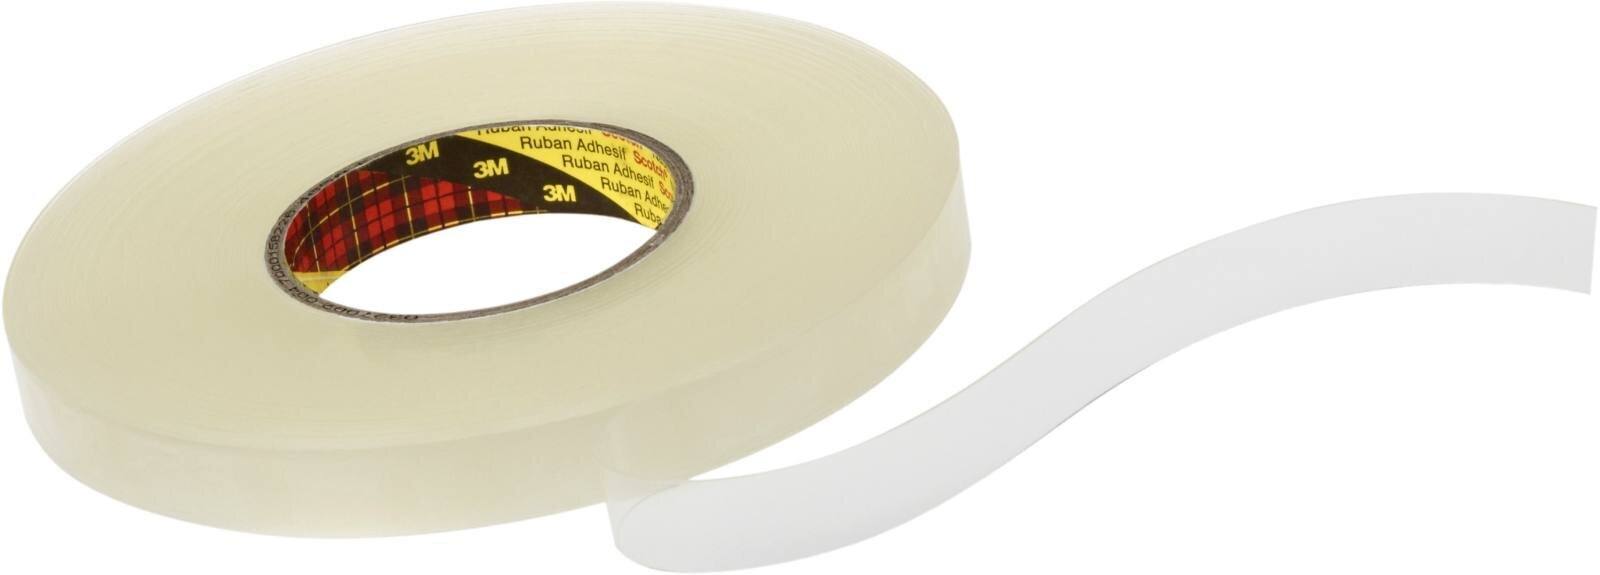 3M double-sided removable adhesive tape 4658F, transparent, 600 mm x 25 m, 0.8 mm